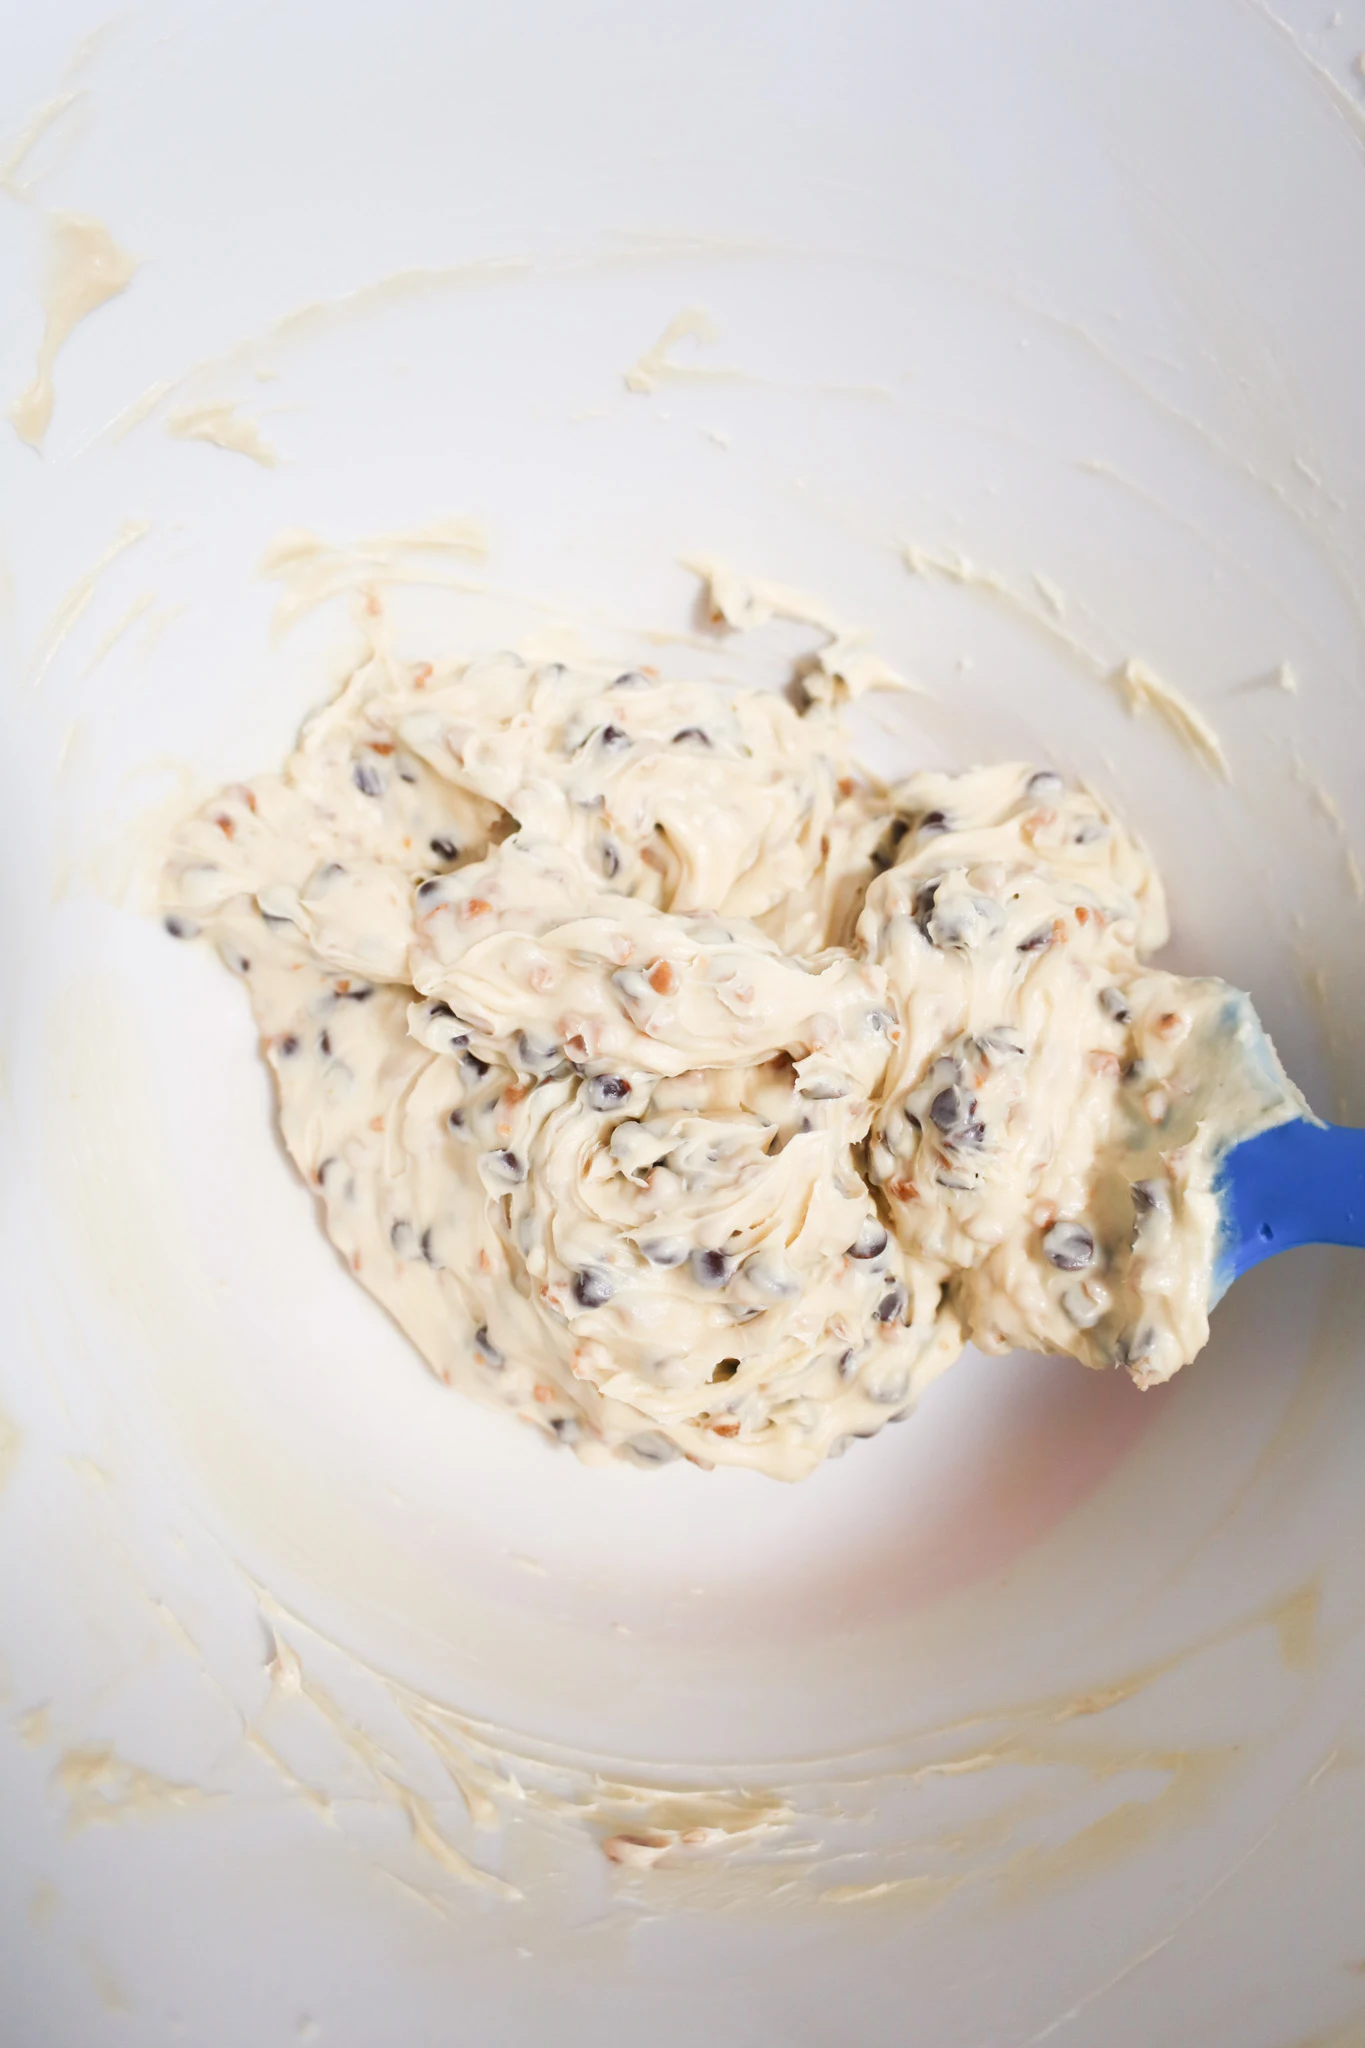 stirring chocolate chips and skor bits into cream cheese mixture